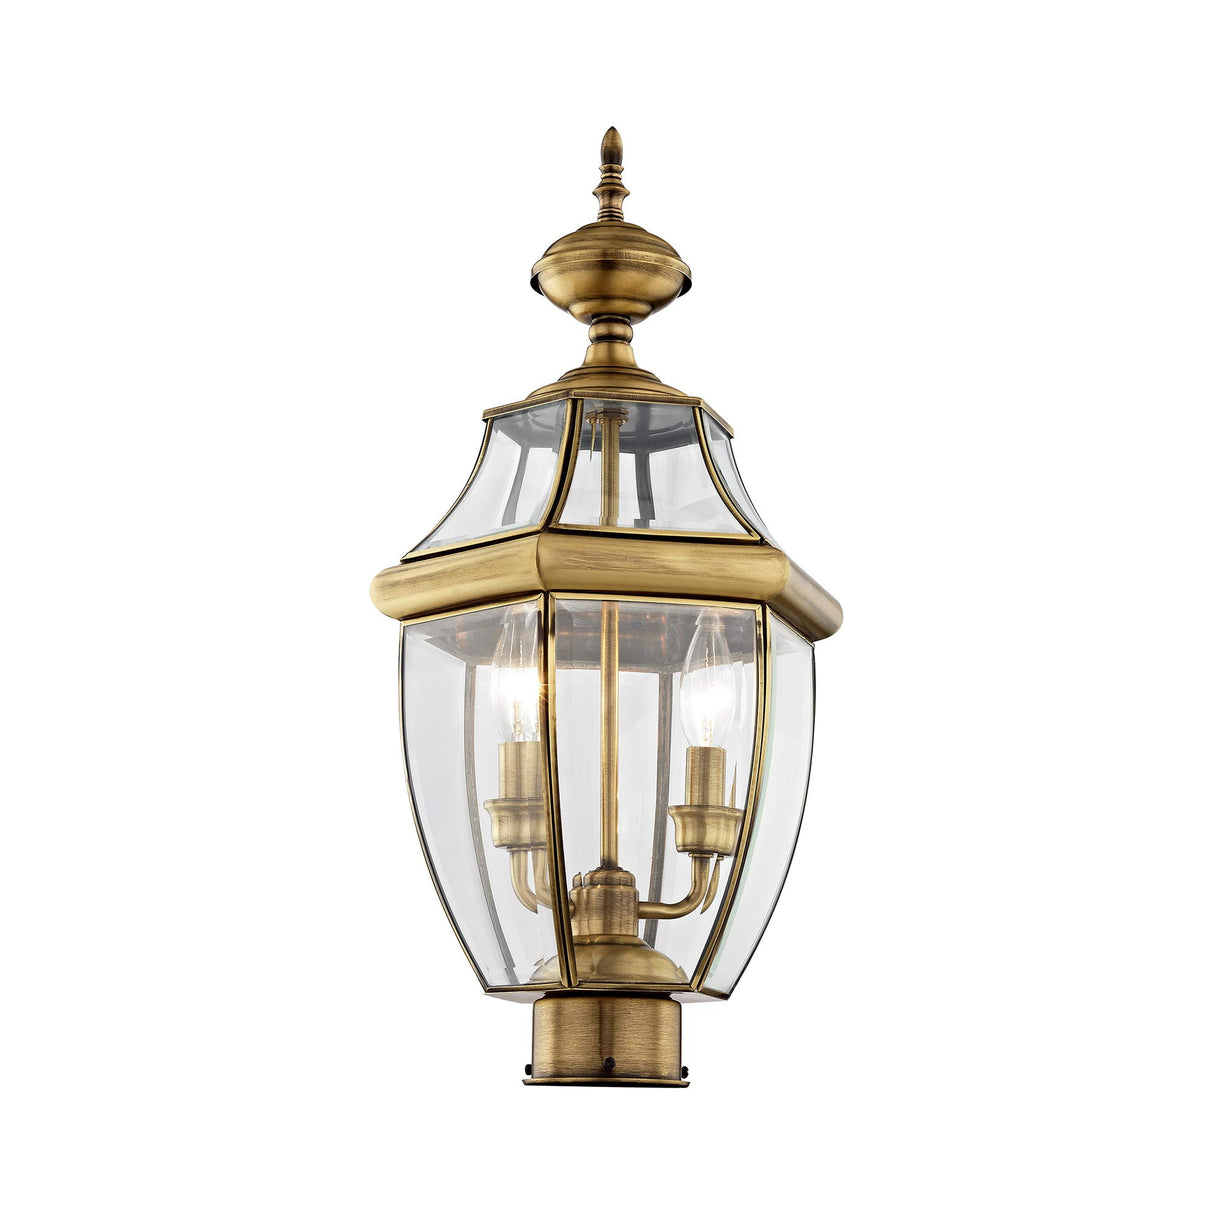 Livex Lighting 2254-01 Monterey 2 Light Outdoor Antique Brass Finish Solid Brass Post Head with Clear Beveled Glass